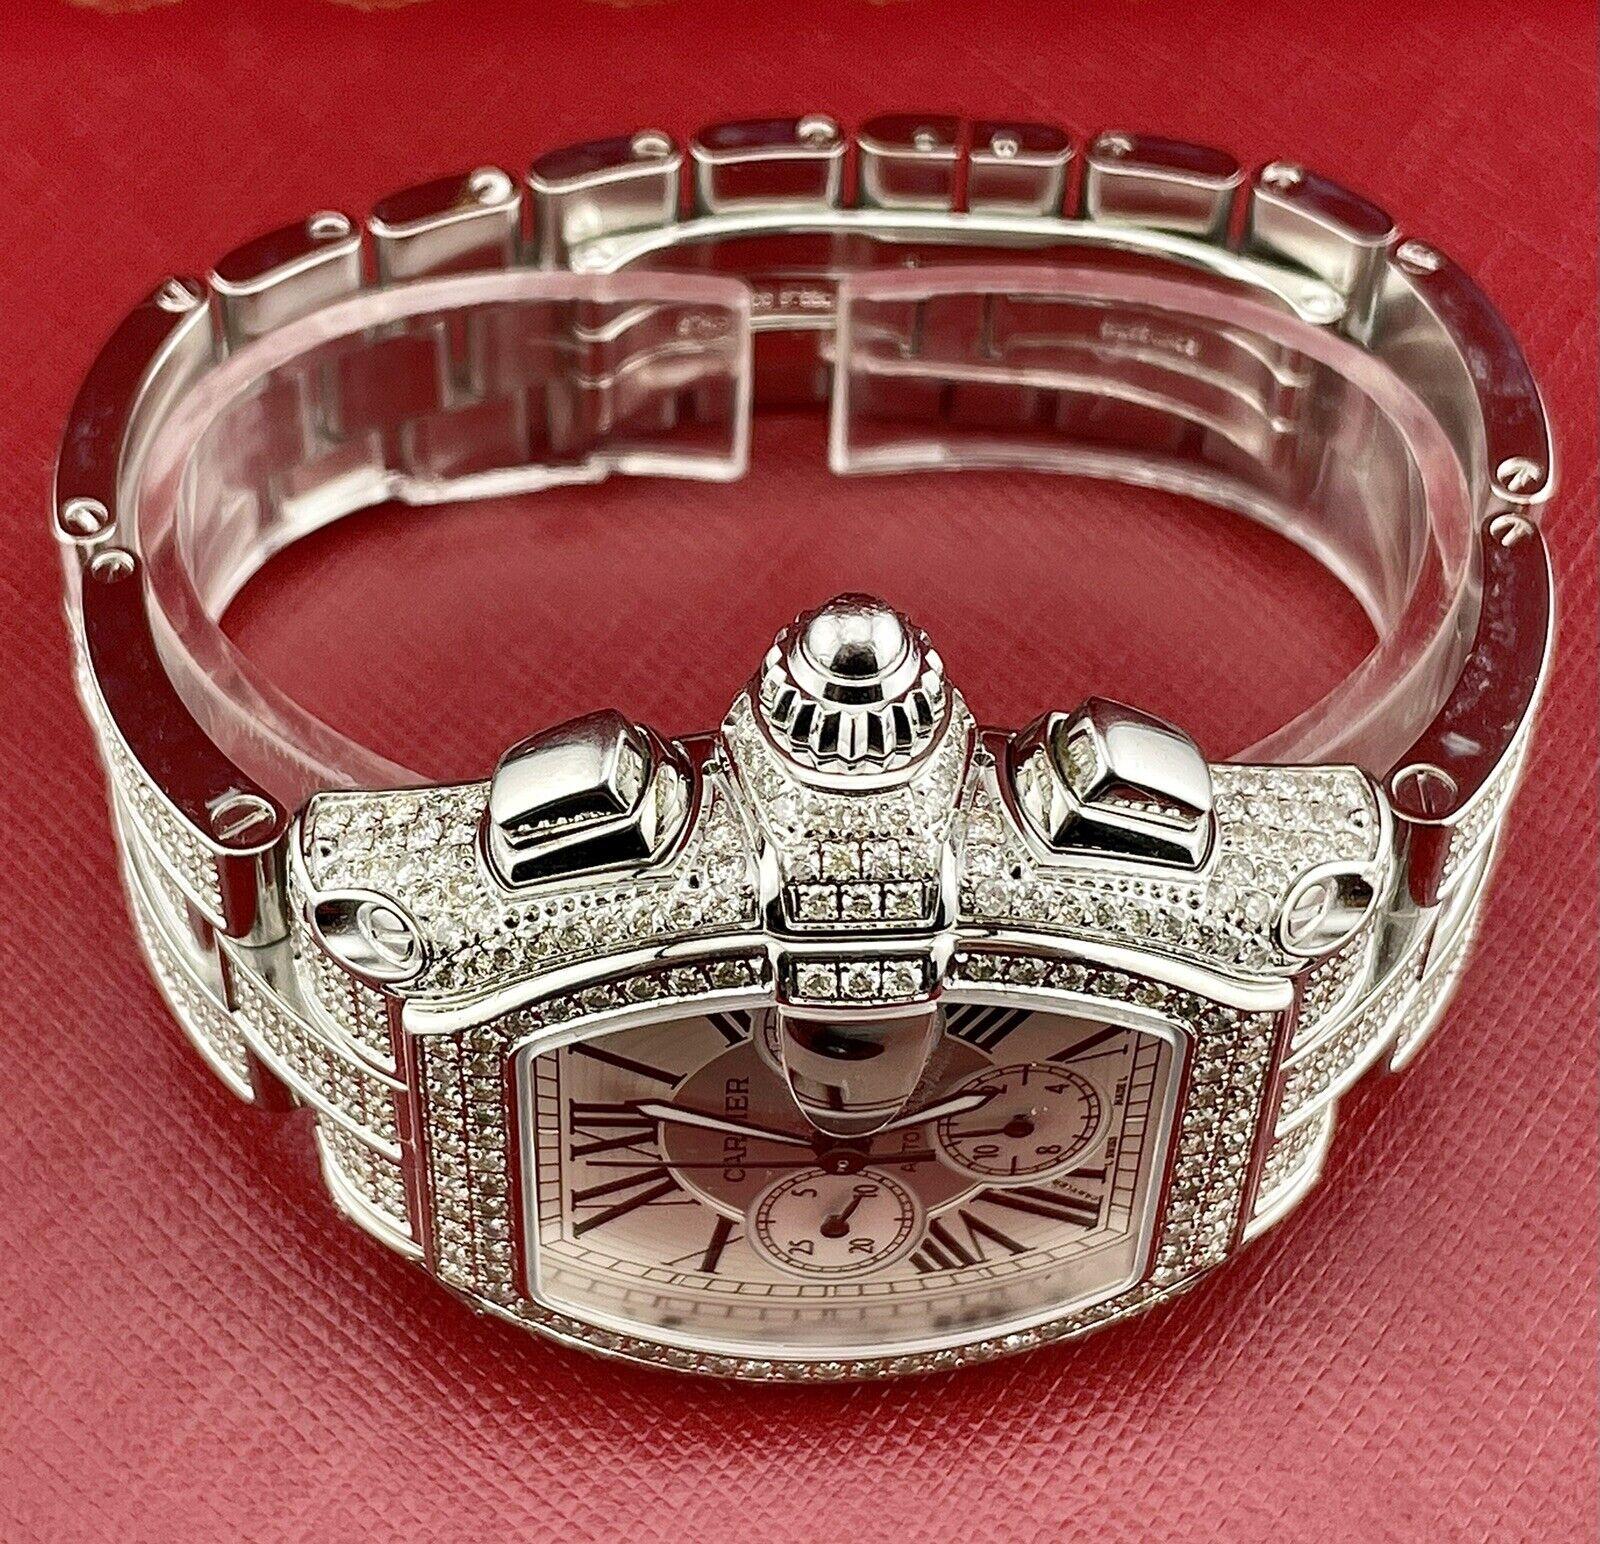 Cartier Roadster XL Men's Watch Silver Dial 43mm Iced Out 12ct Diamonds Ref 2618 In Good Condition For Sale In Pleasanton, CA